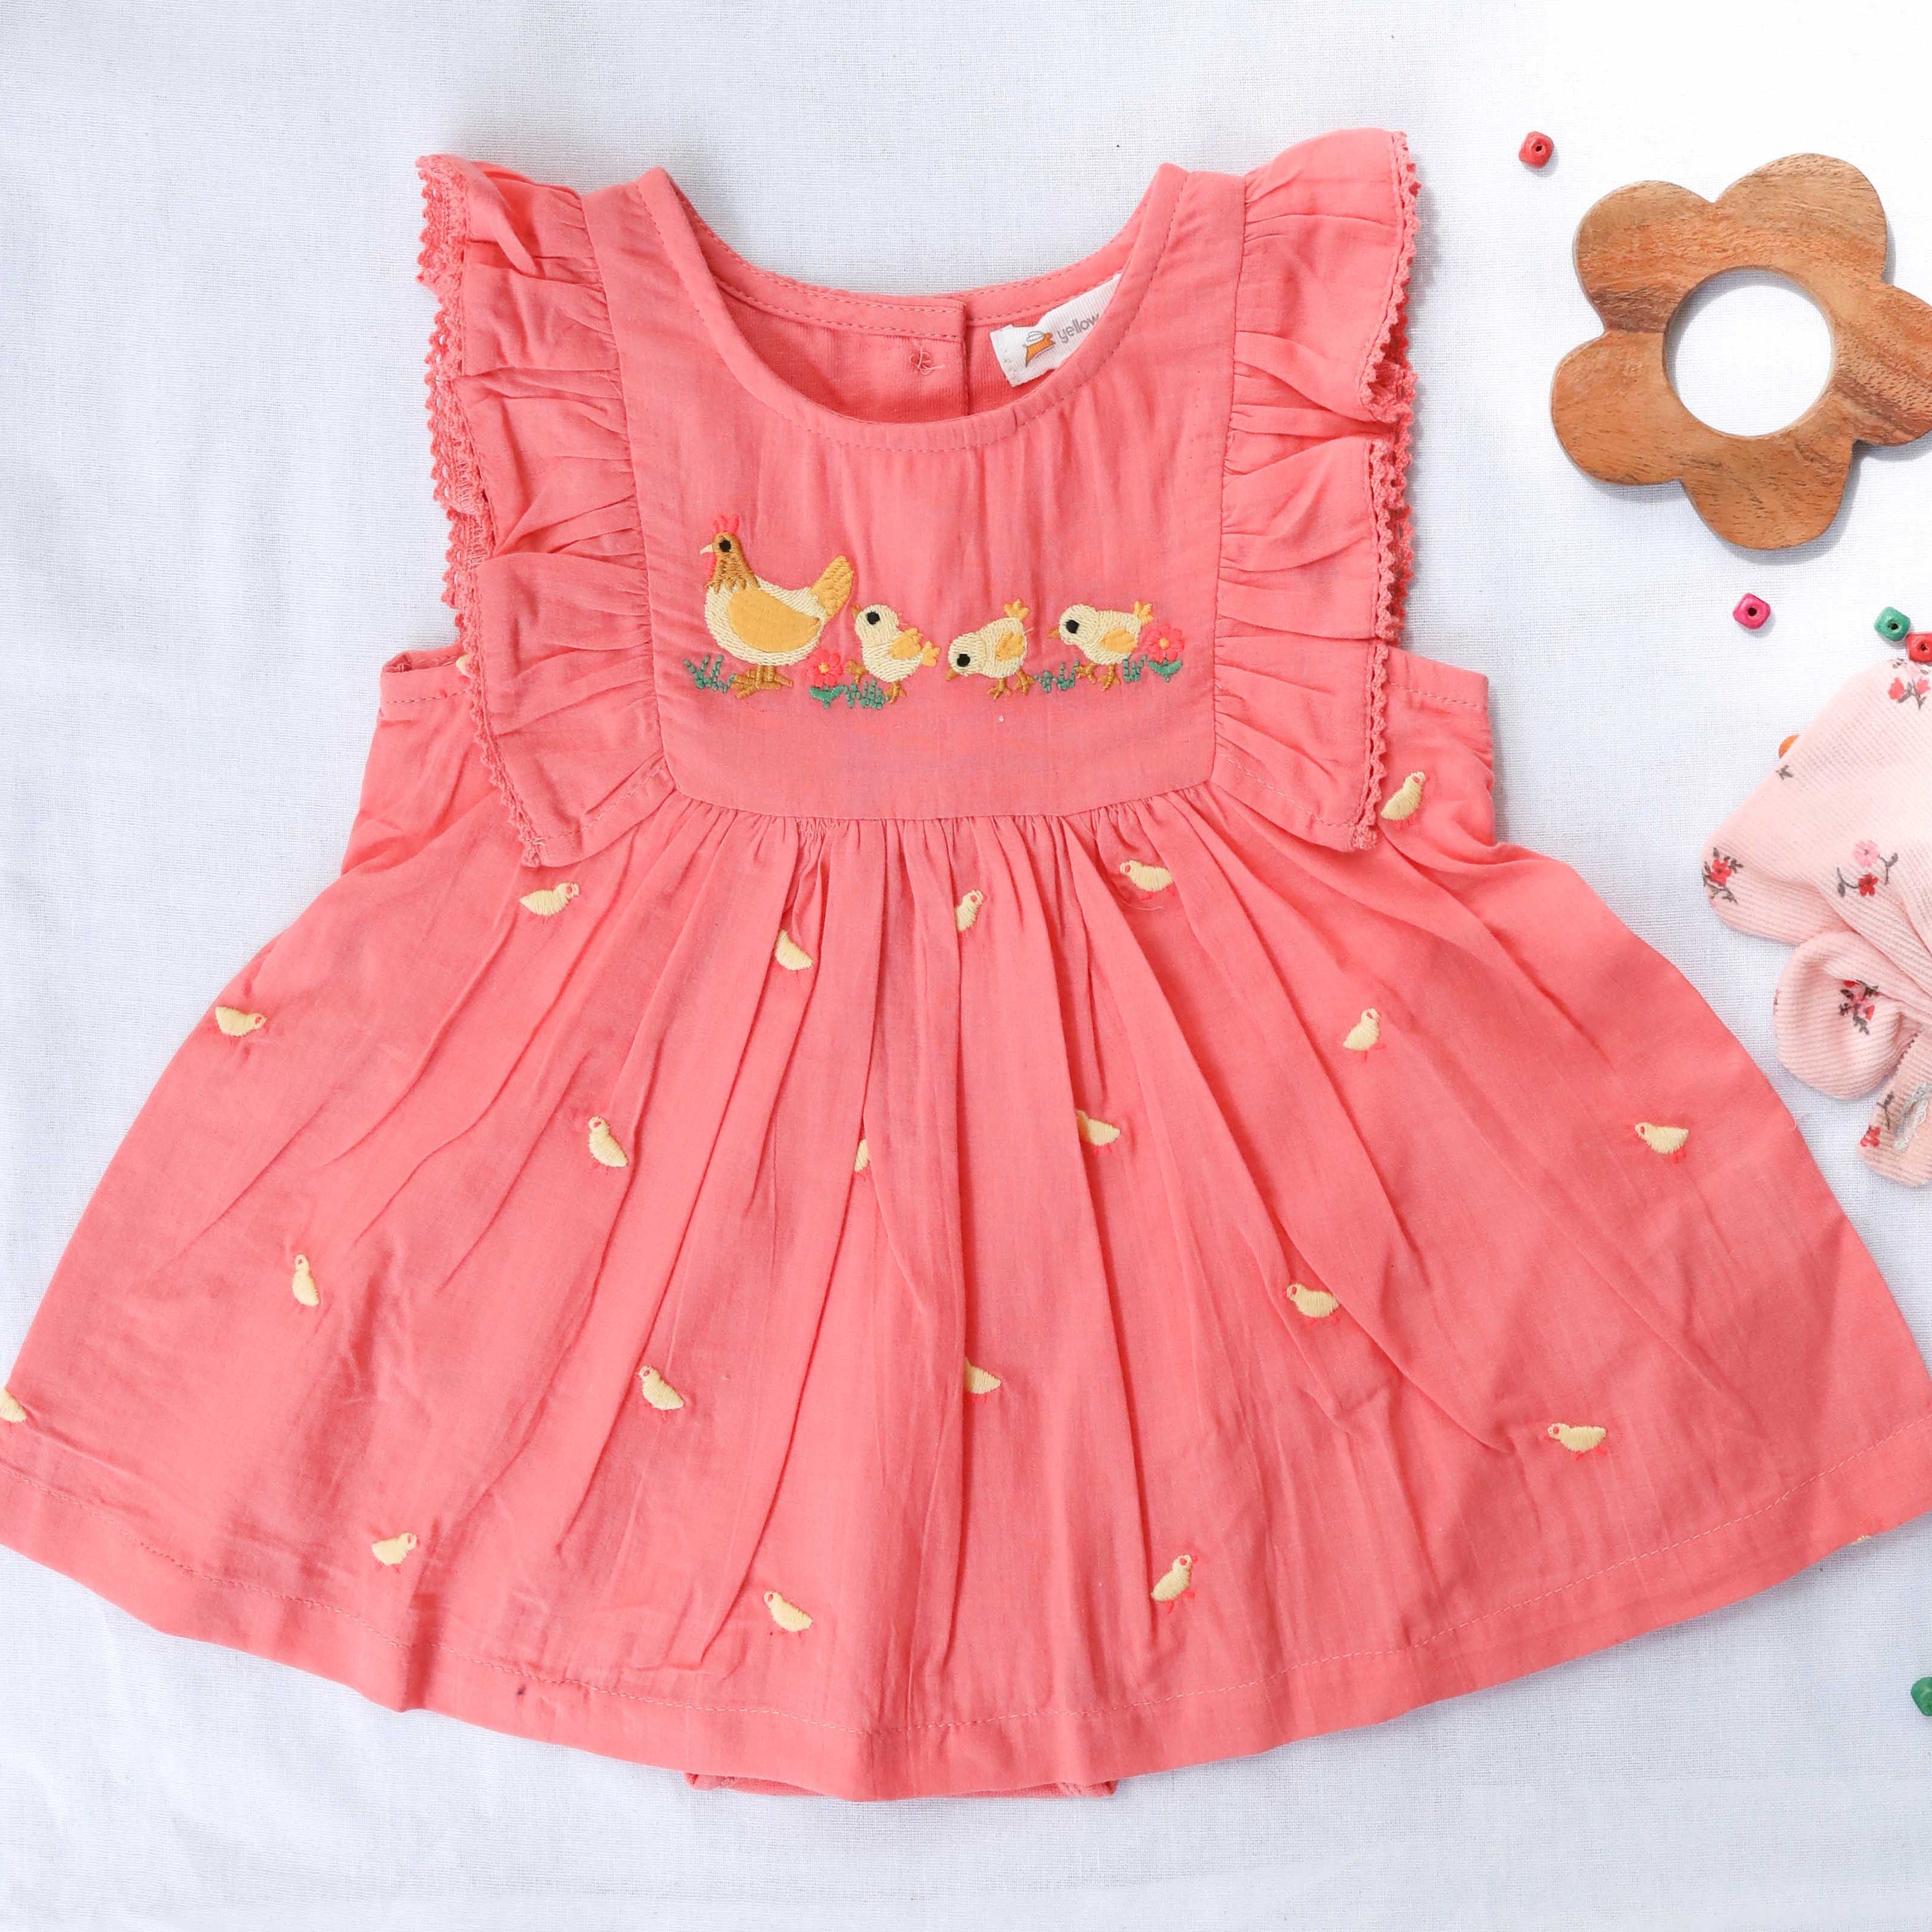 Coral Chic dress